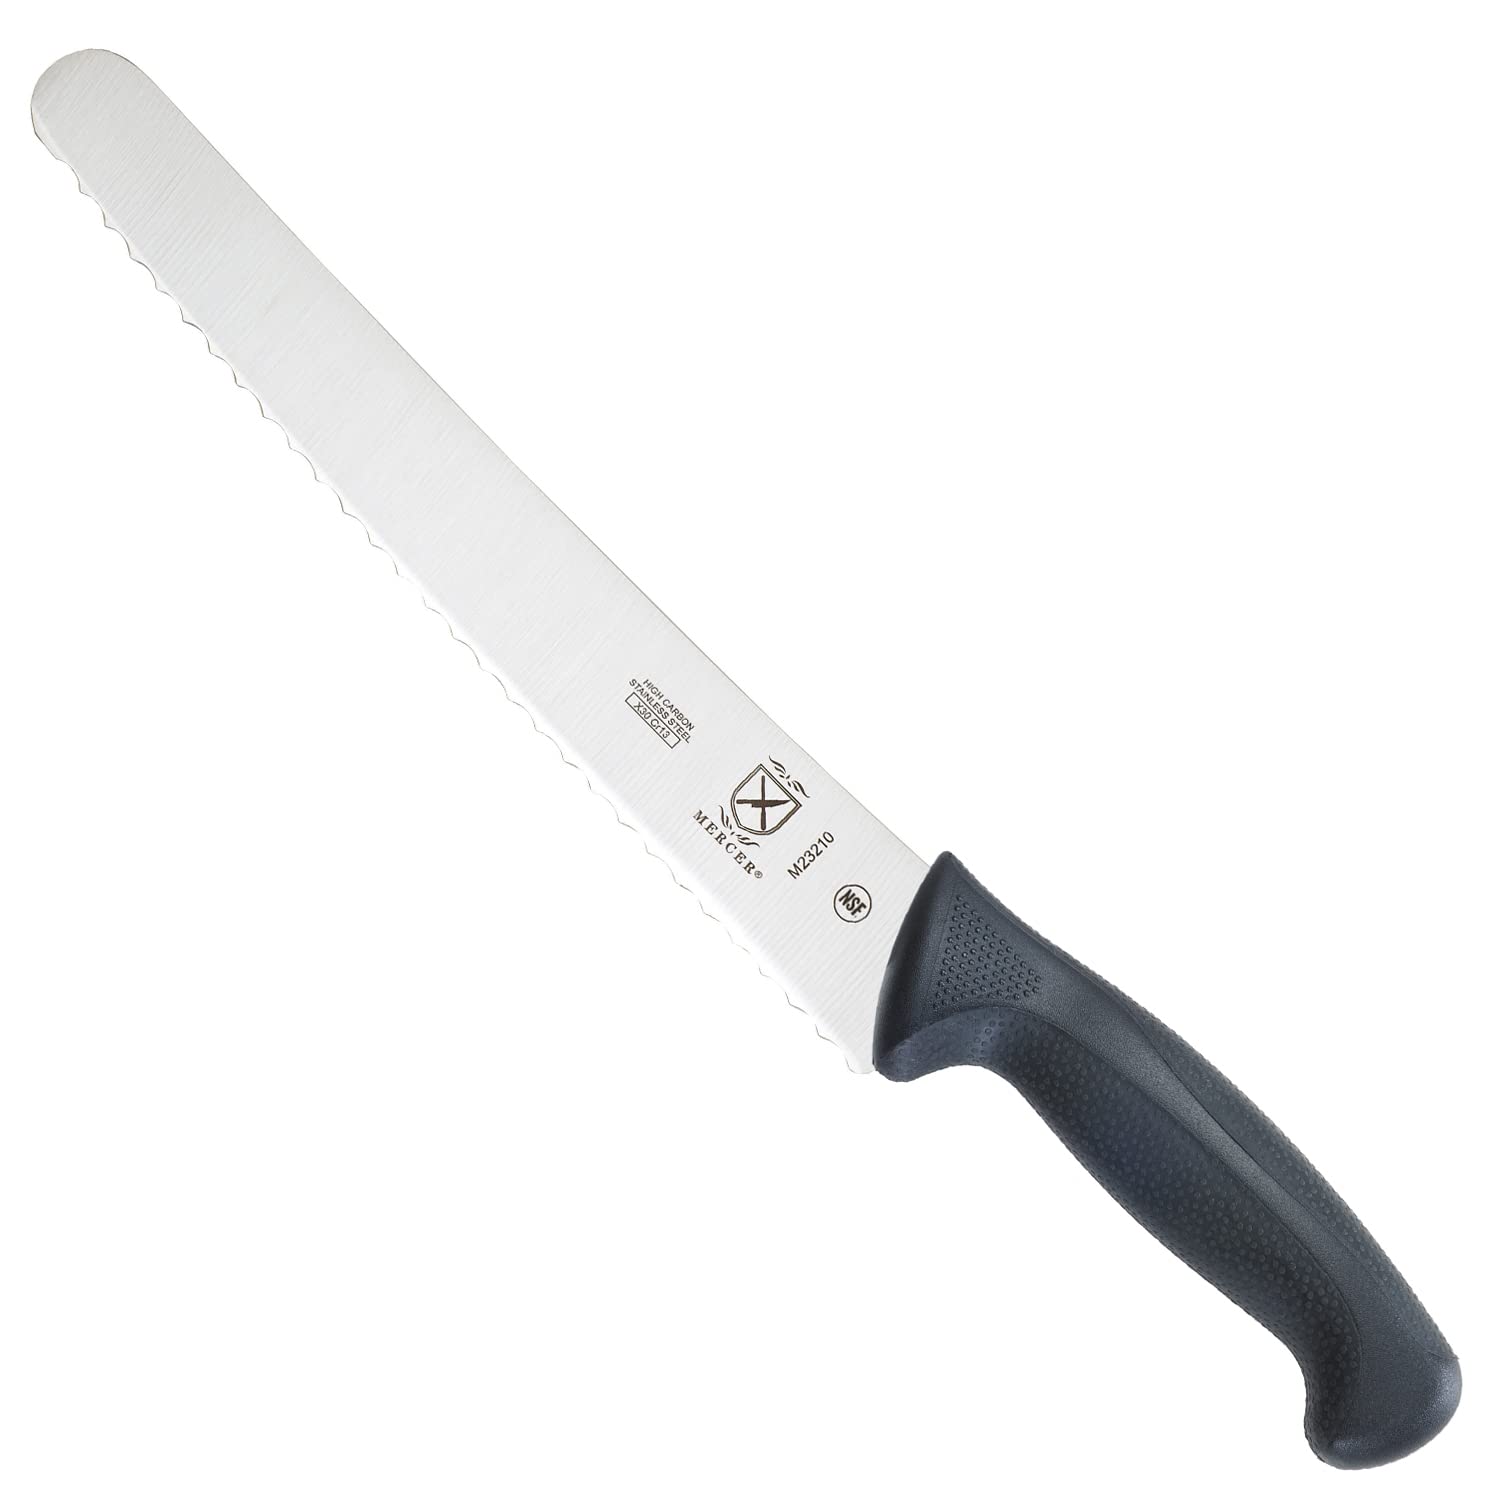 A Review of the Best Bread Knife